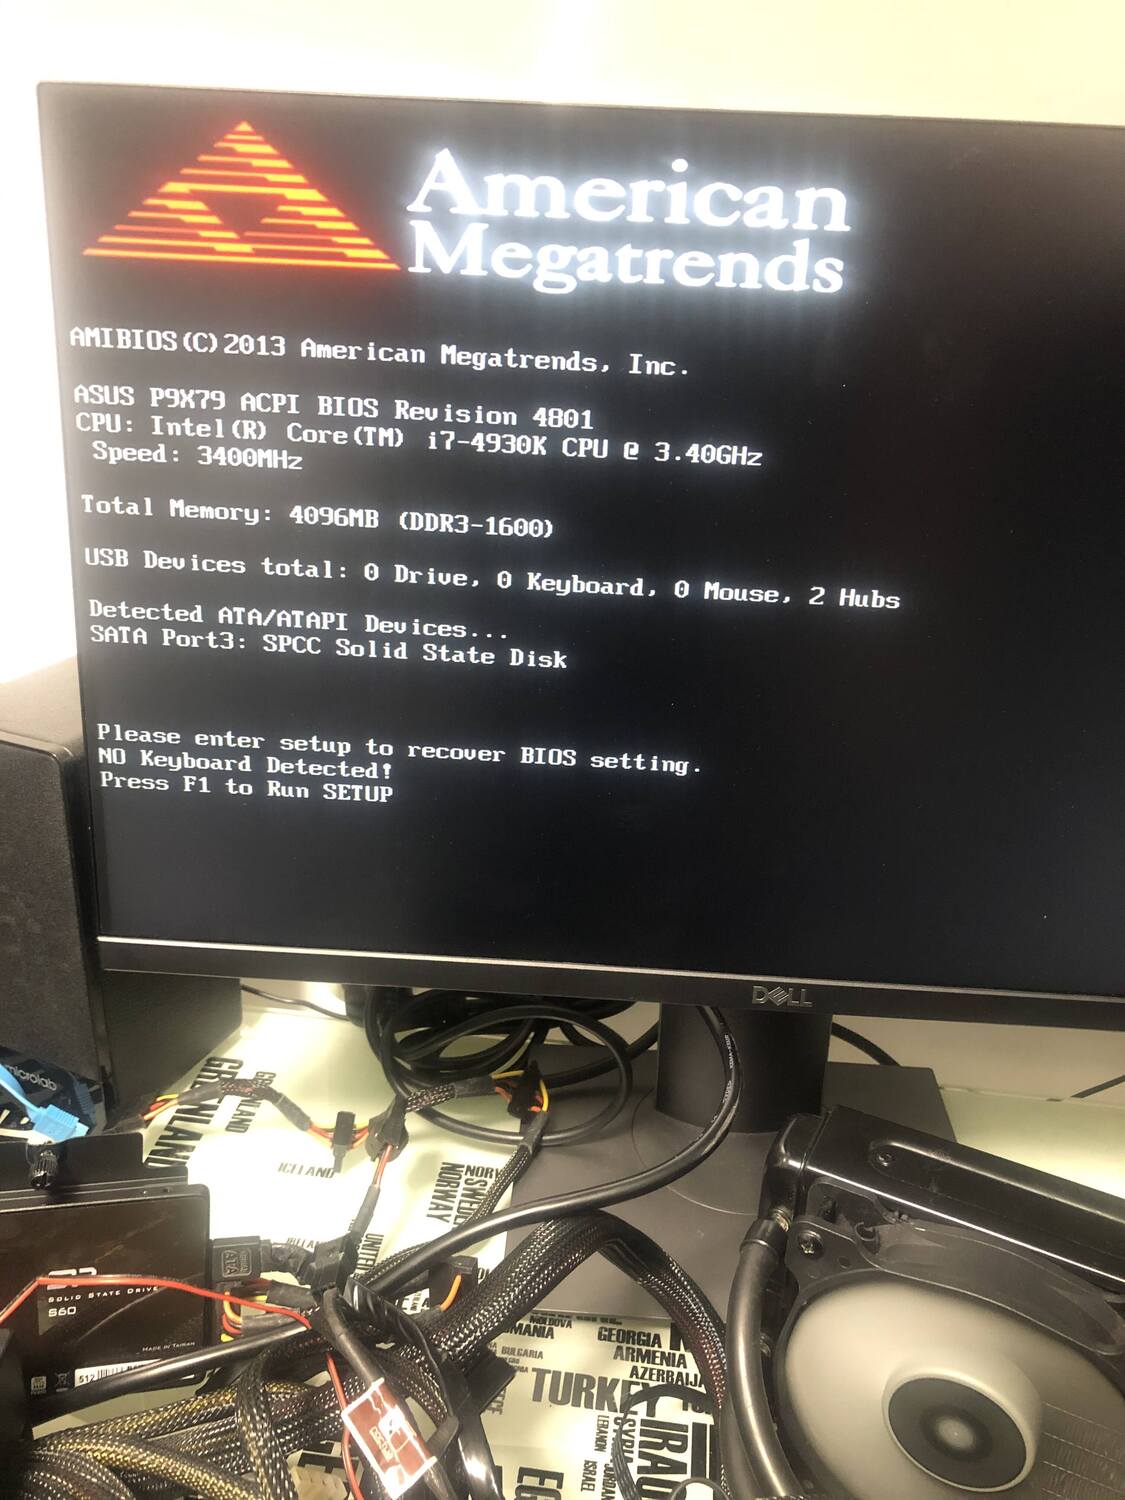 Boot Device LED red, no POST. - CPUs, Motherboards, and Memory - Linus